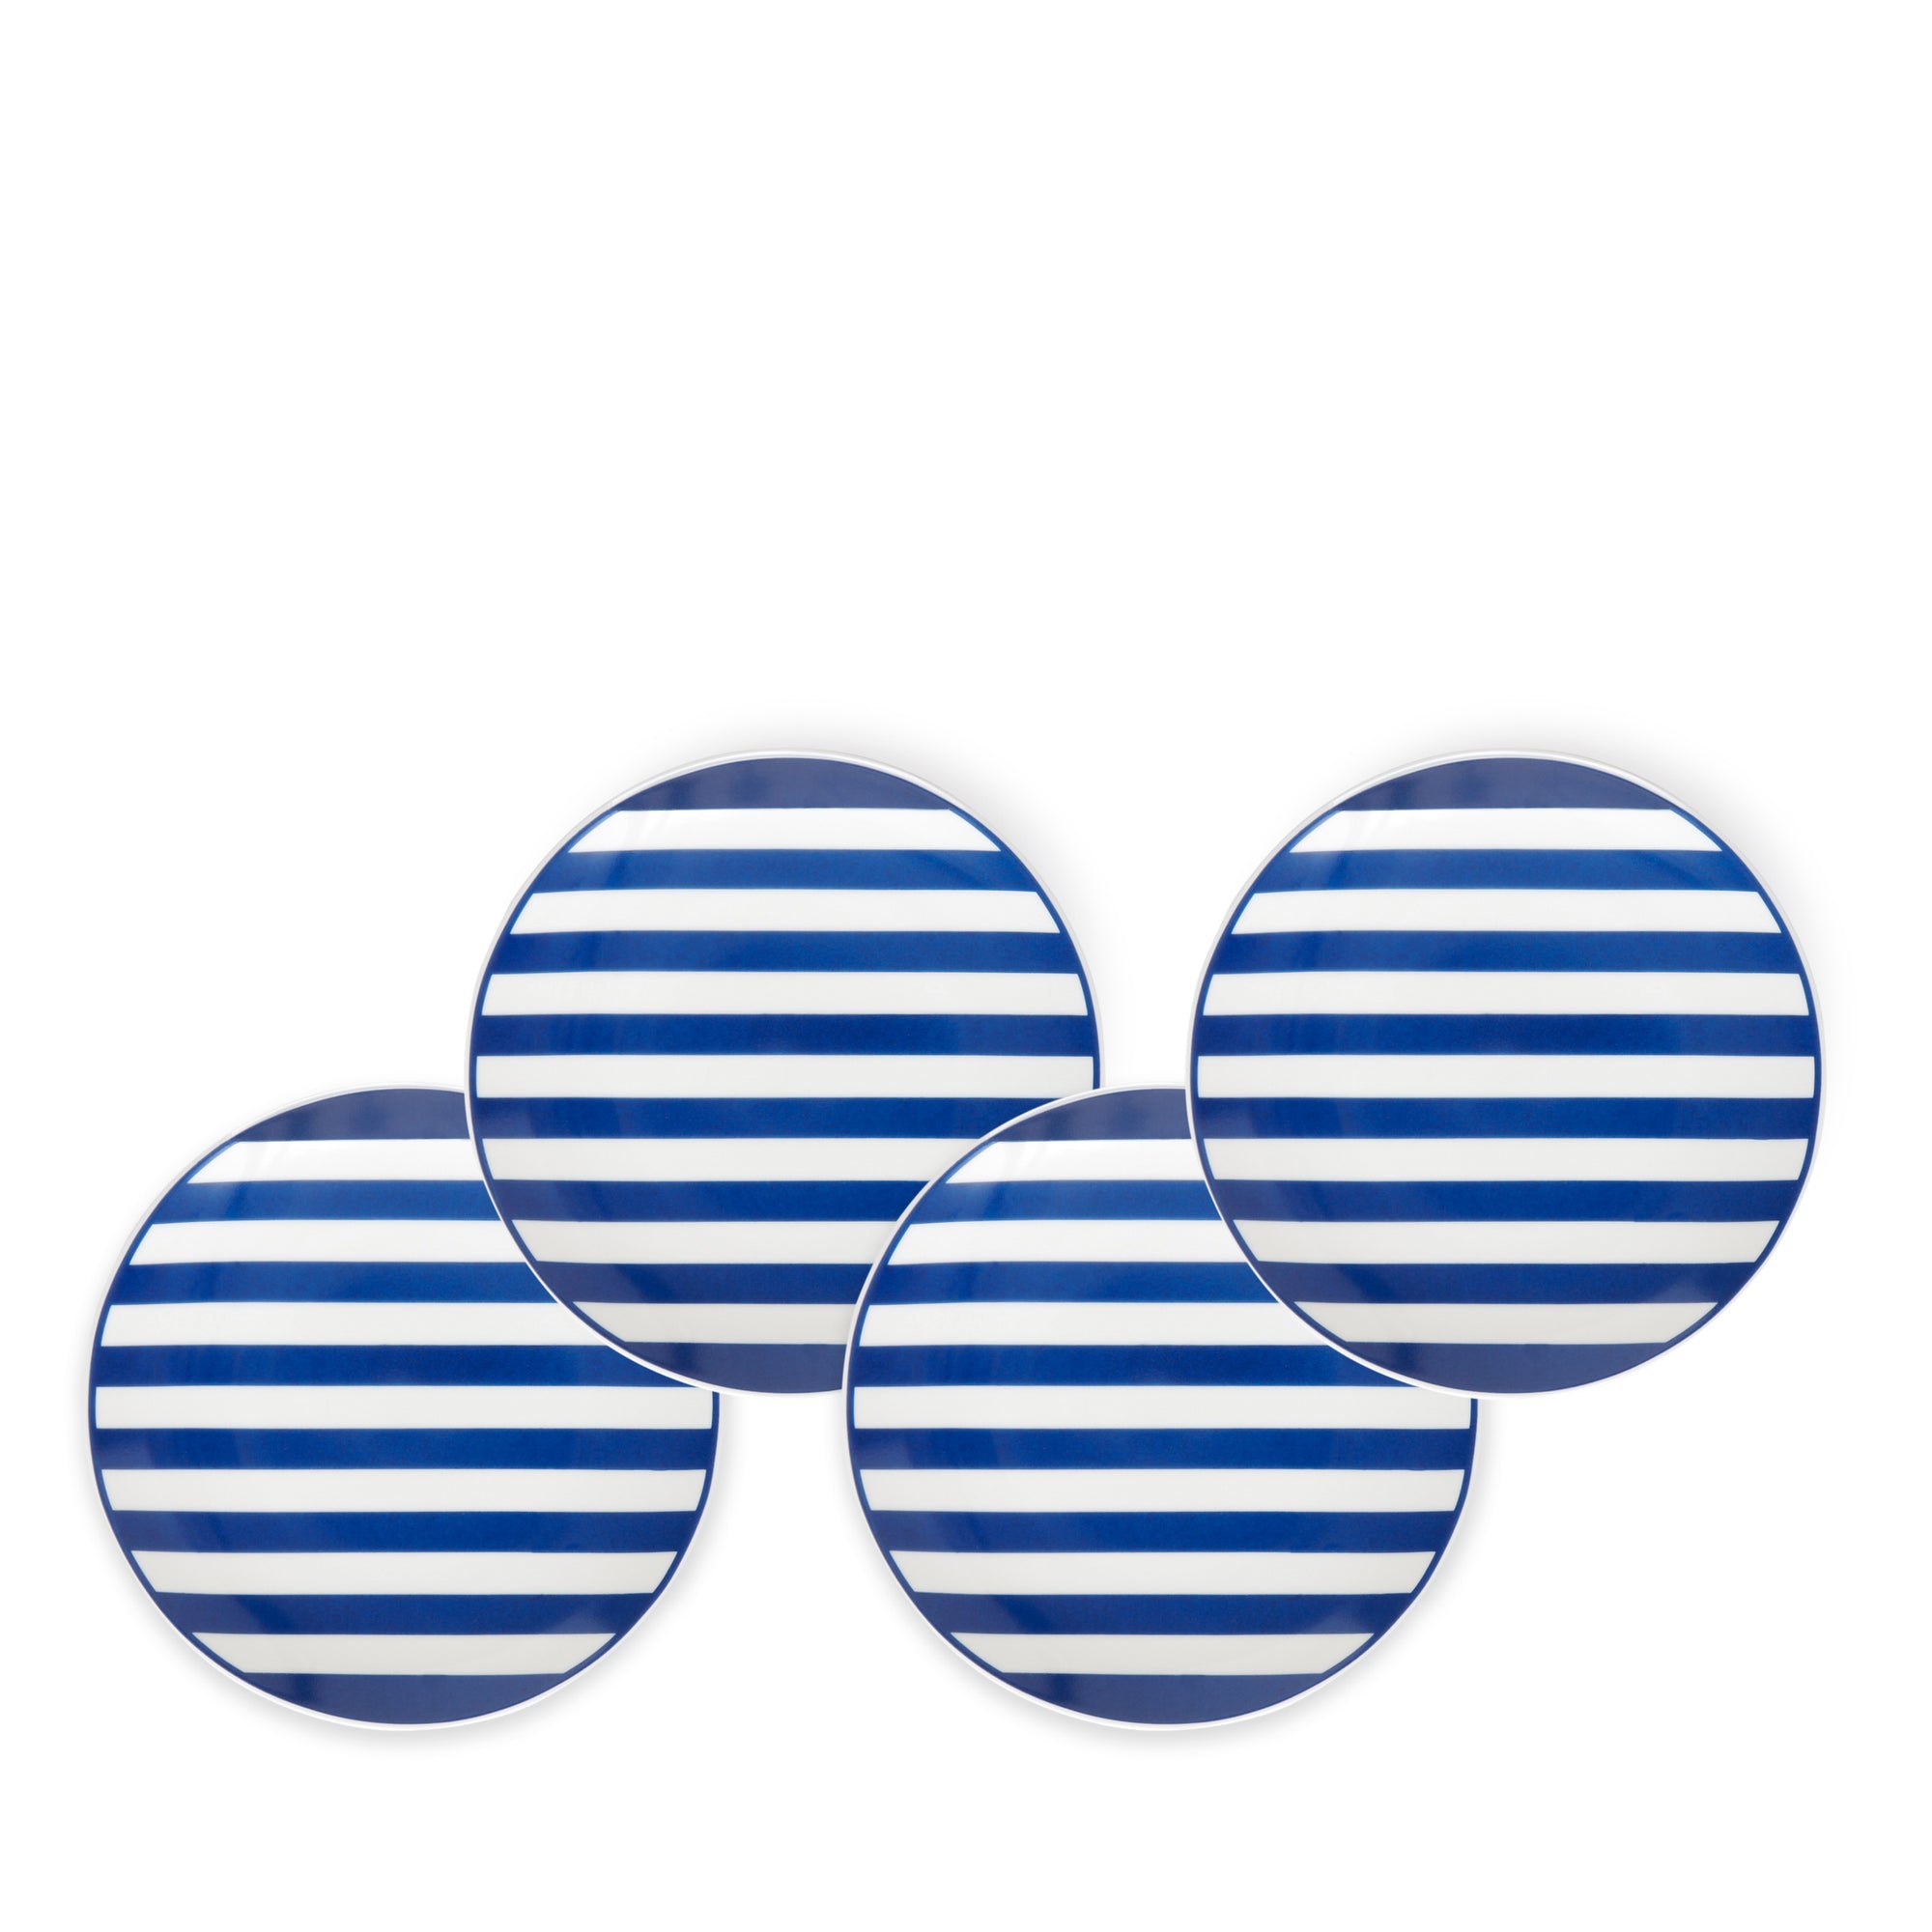 Four round porcelain Beach Towel Stripe Small Plates by Caskata Artisanal Home are arranged in a slightly overlapping pattern on a plain white background.